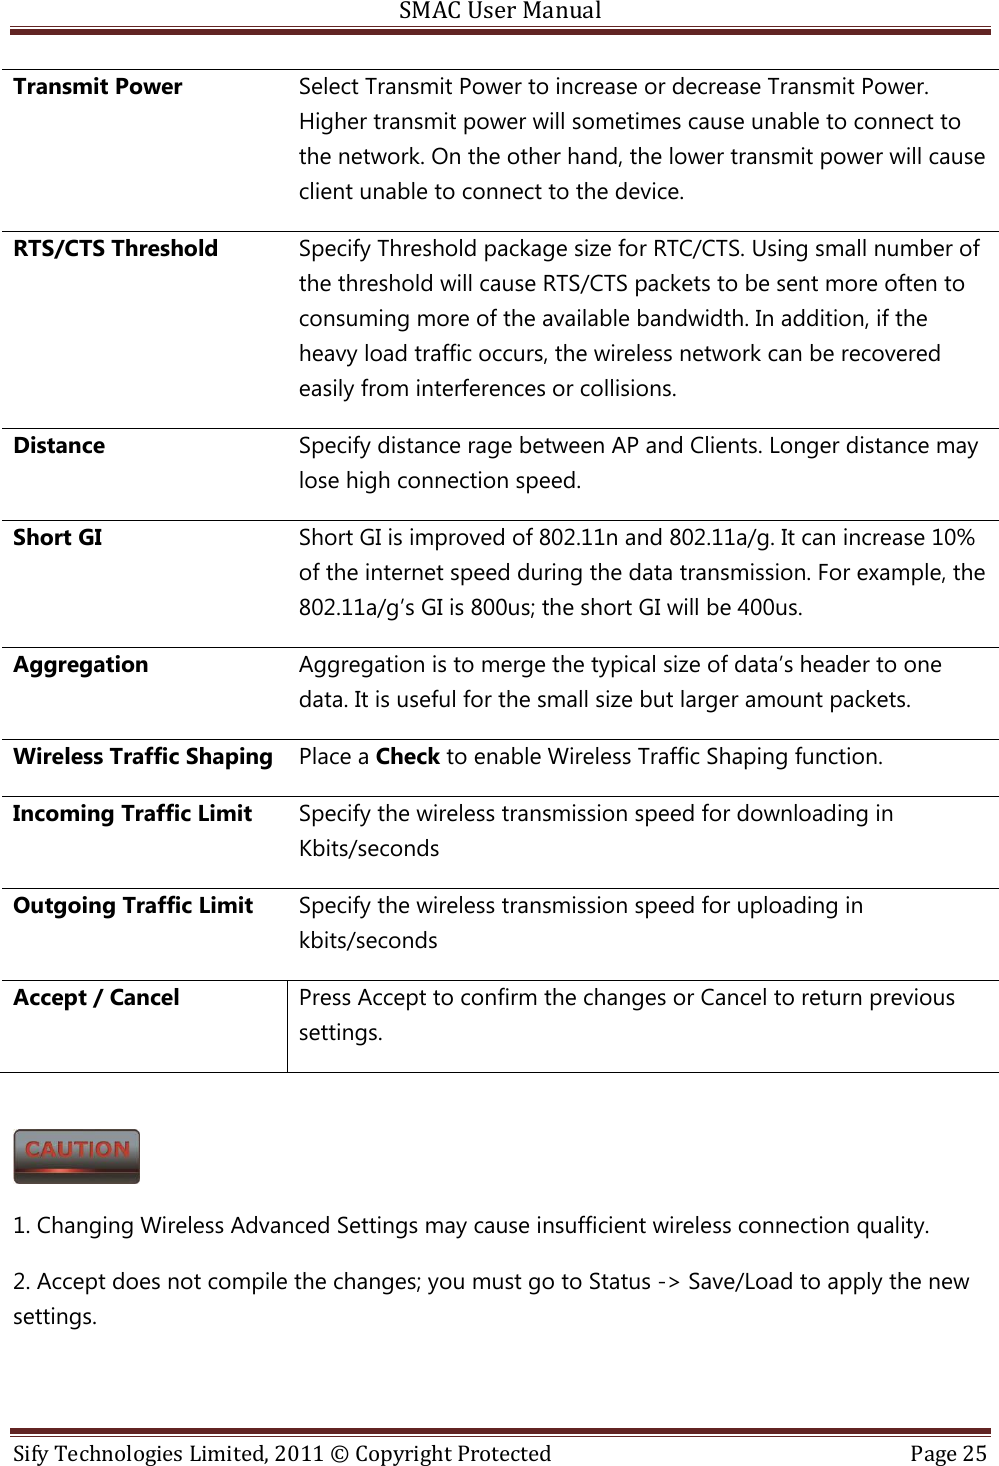 SMAC User Manual  Sify Technologies Limited, 2011 © Copyright Protected  Page 25  Transmit Power Select Transmit Power to increase or decrease Transmit Power. Higher transmit power will sometimes cause unable to connect to the network. On the other hand, the lower transmit power will cause client unable to connect to the device. RTS/CTS Threshold Specify Threshold package size for RTC/CTS. Using small number of the threshold will cause RTS/CTS packets to be sent more often to consuming more of the available bandwidth. In addition, if the heavy load traffic occurs, the wireless network can be recovered easily from interferences or collisions. Distance Specify distance rage between AP and Clients. Longer distance may lose high connection speed. Short GI Short GI is improved of 802.11n and 802.11a/g. It can increase 10% of the internet speed during the data transmission. For example, the 802.11a/g’s GI is 800us; the short GI will be 400us. Aggregation Aggregation is to merge the typical size of data’s header to one data. It is useful for the small size but larger amount packets. Wireless Traffic Shaping Place a Check to enable Wireless Traffic Shaping function. Incoming Traffic Limit Specify the wireless transmission speed for downloading in Kbits/seconds Outgoing Traffic Limit Specify the wireless transmission speed for uploading in kbits/seconds Accept / Cancel Press Accept to confirm the changes or Cancel to return previous settings.    1. Changing Wireless Advanced Settings may cause insufficient wireless connection quality.  2. Accept does not compile the changes; you must go to Status -&gt; Save/Load to apply the new settings.   